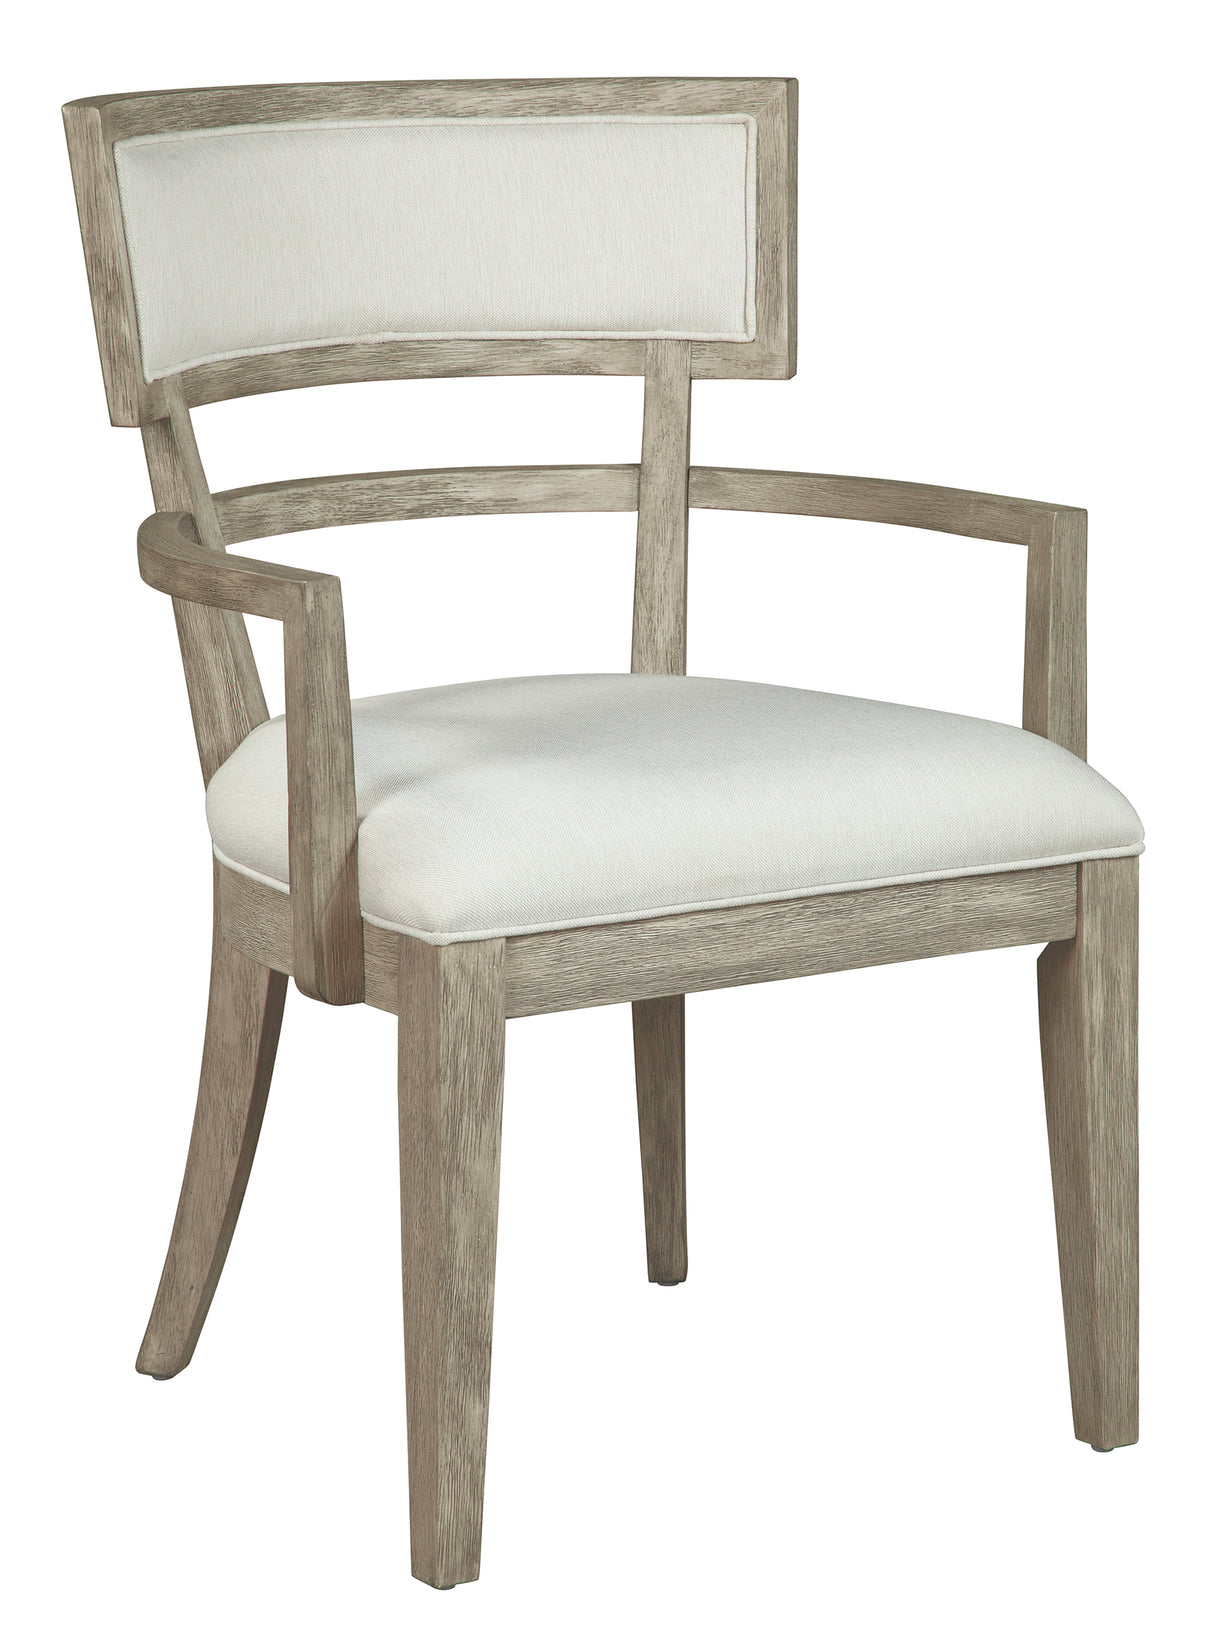 Hekman 24922 Bedford Park 24.5in. x 24.5in. x 36in. Dining Arm Chair